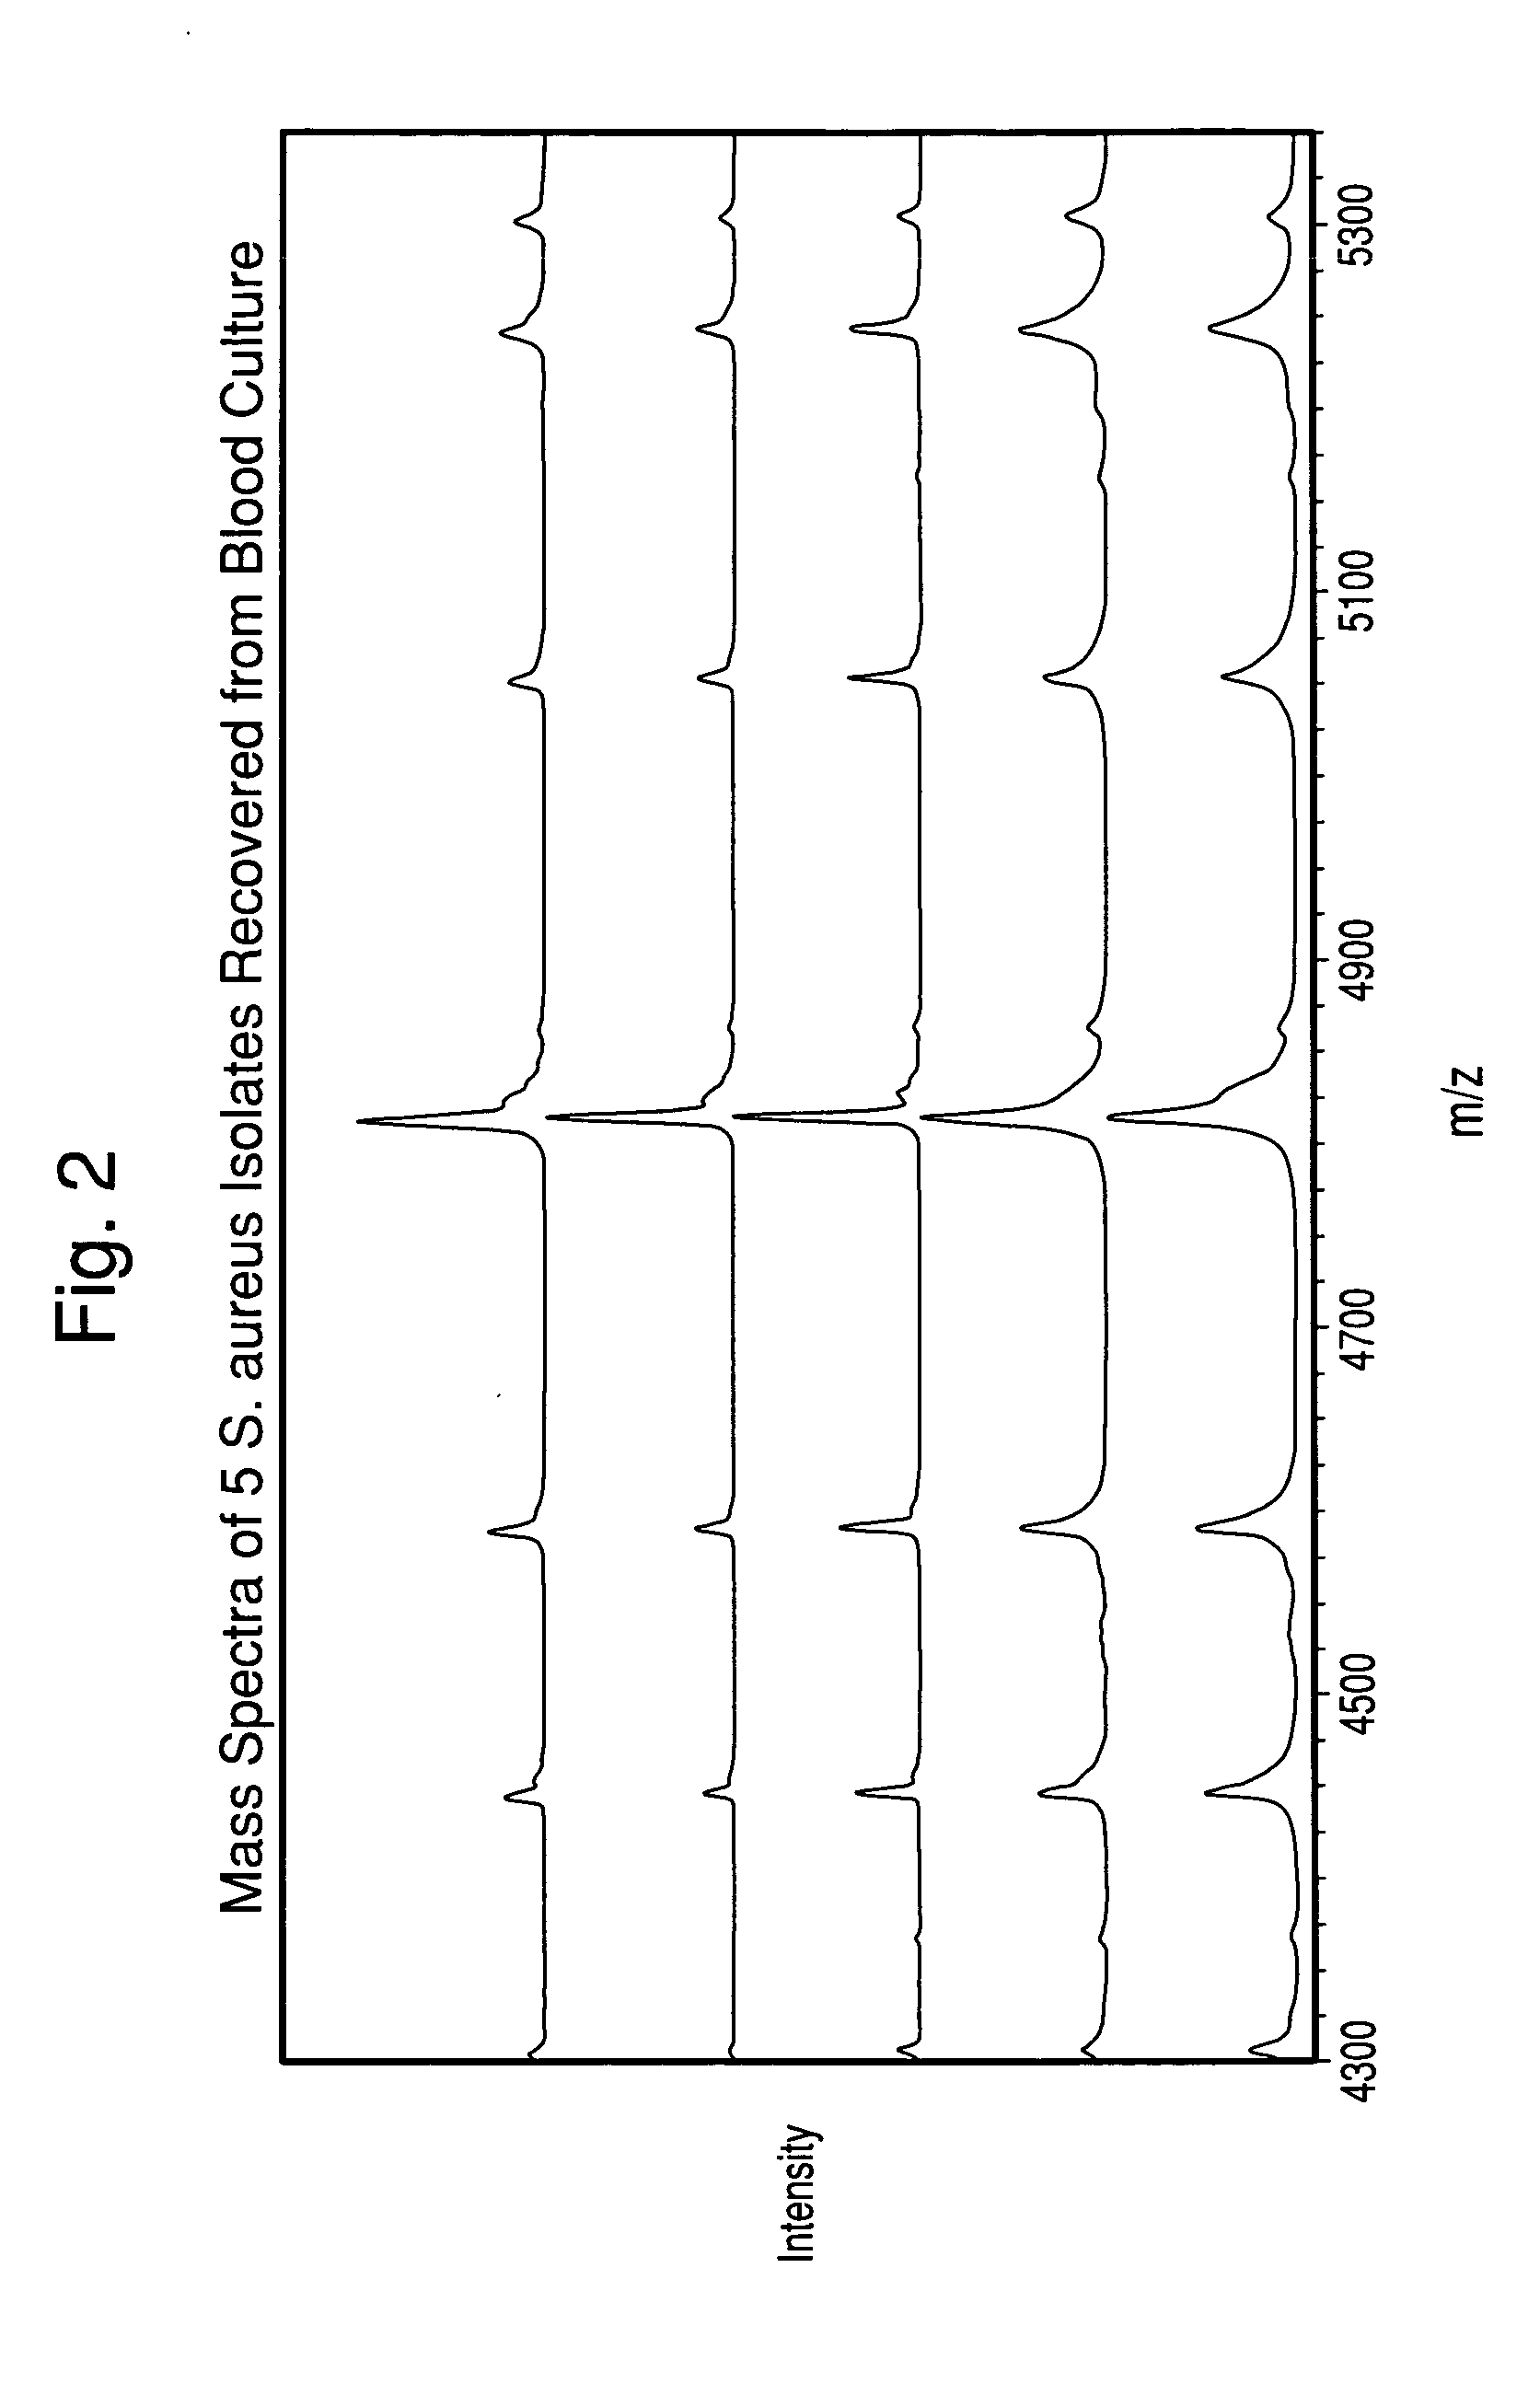 Method for separation, characterization and/or identification of microorganisms using mass spectrometry